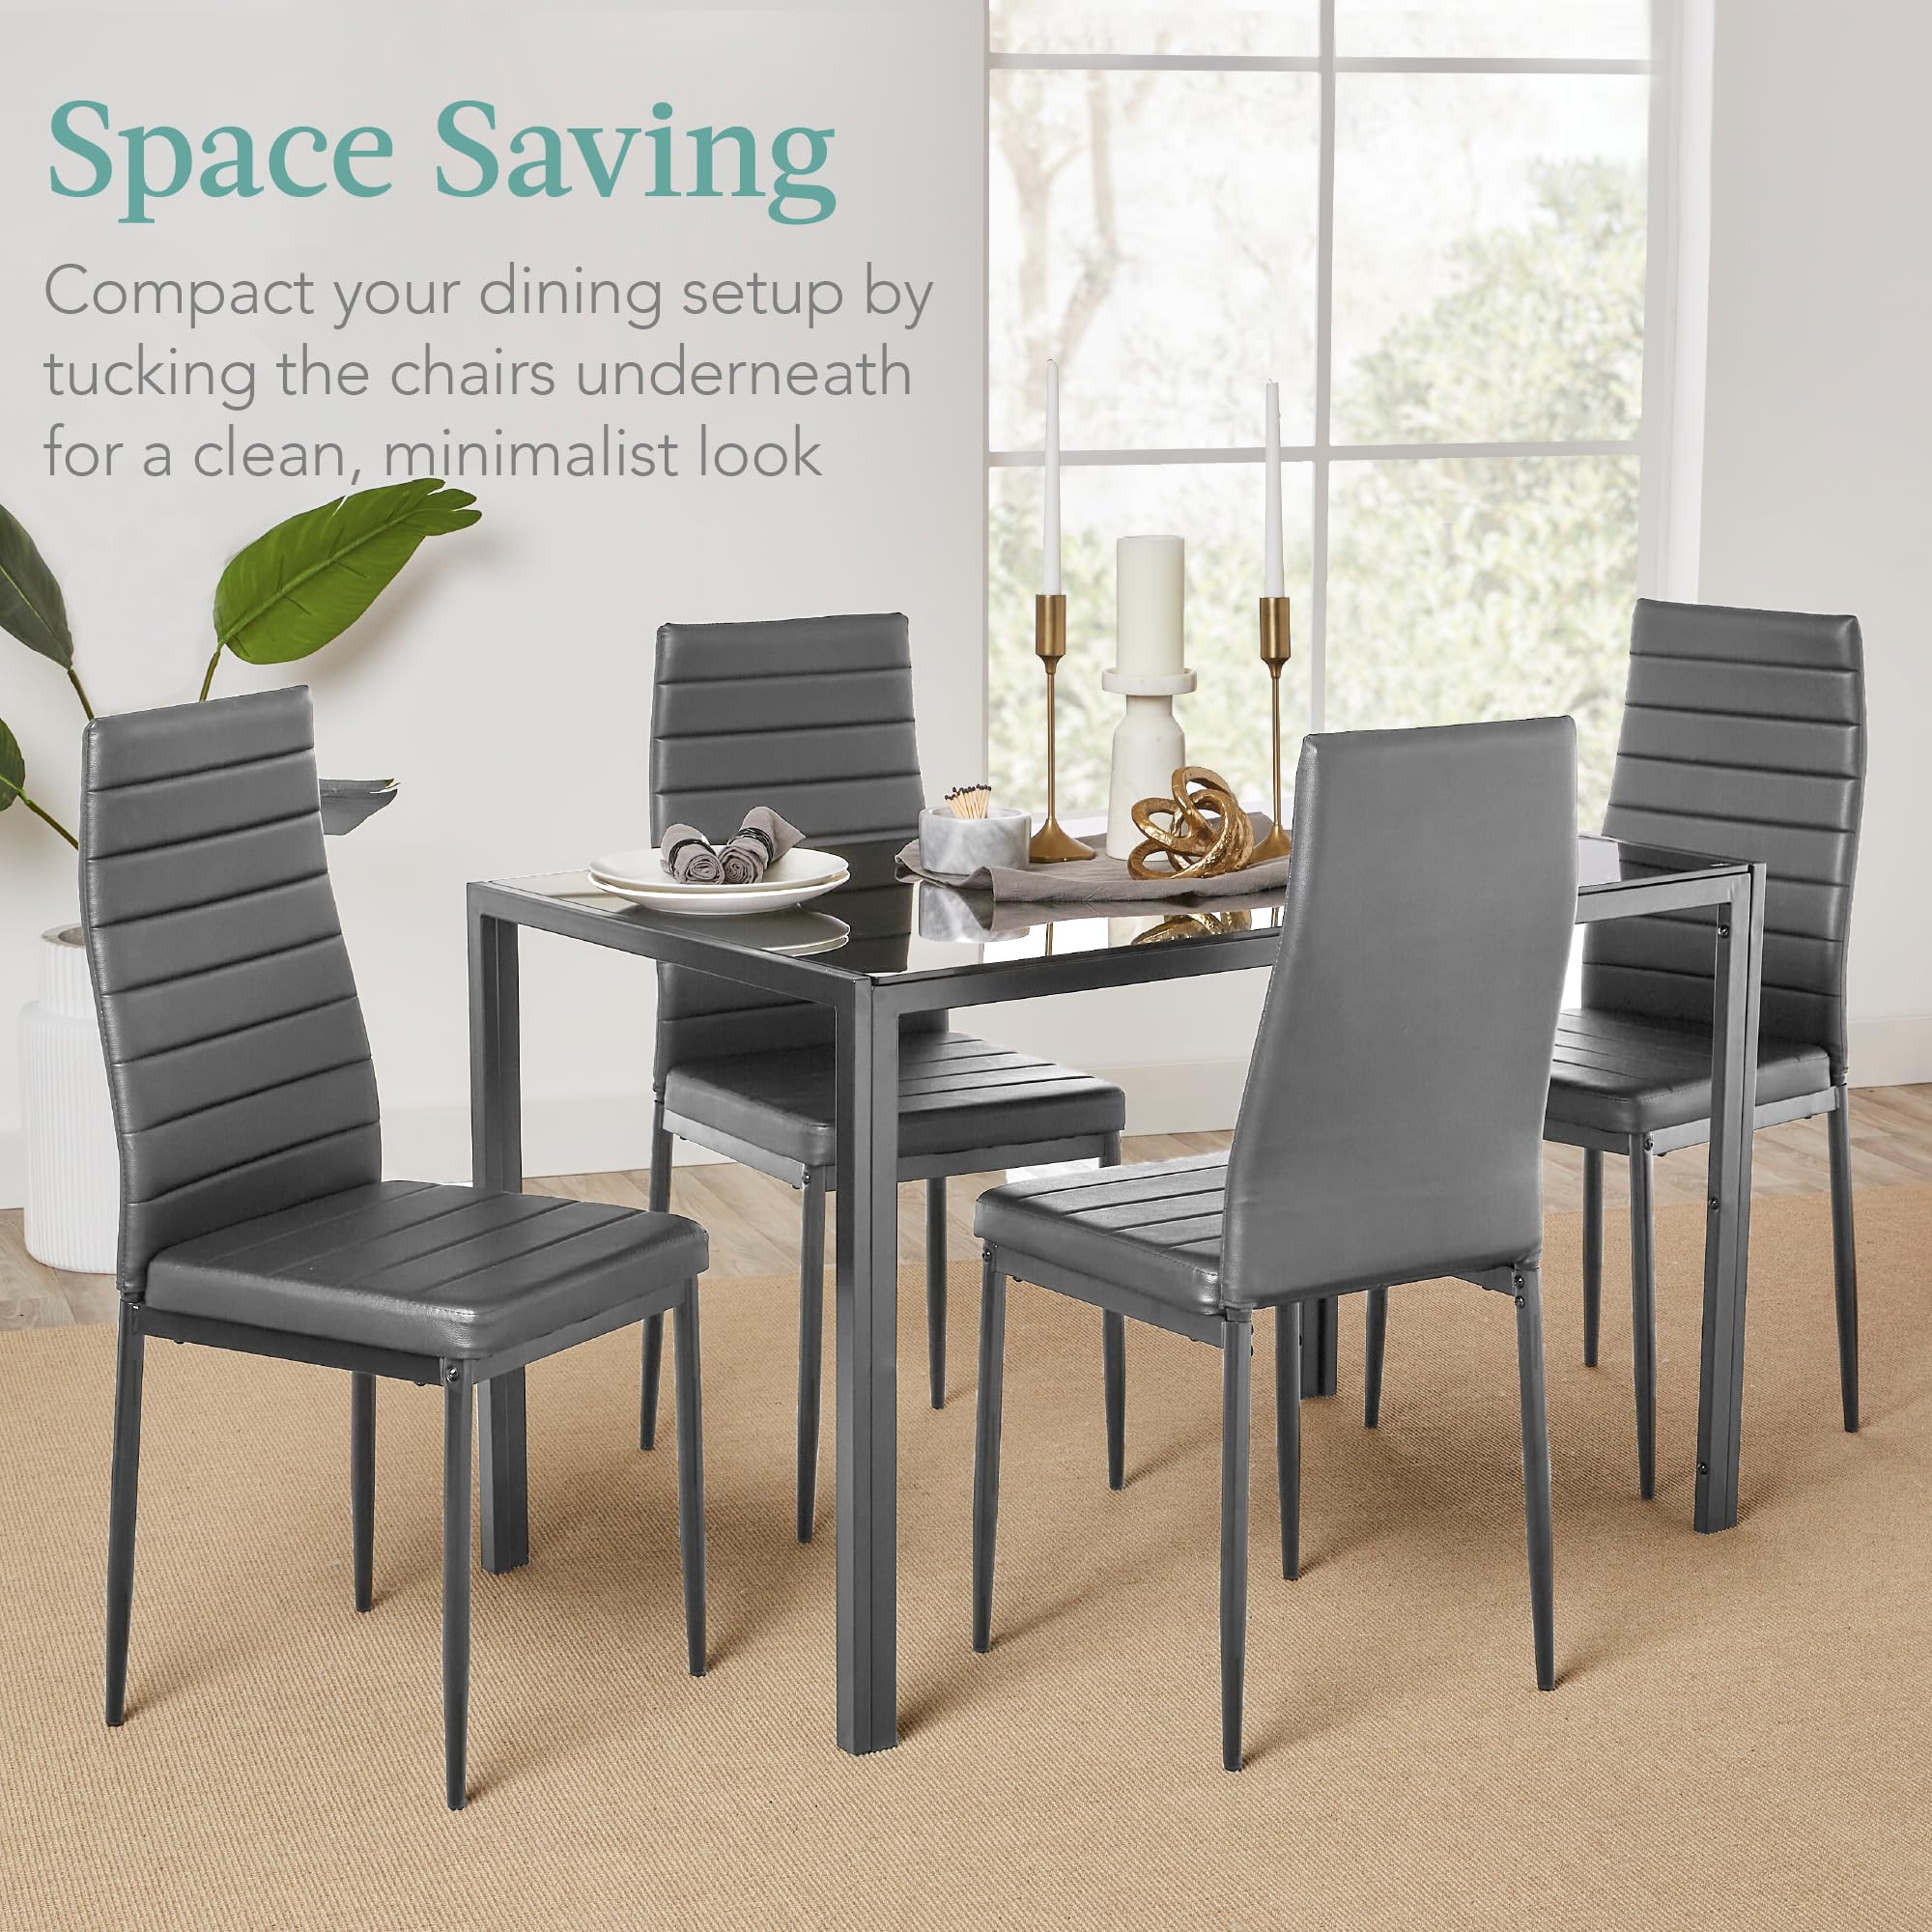 Best Choice Products 5-Piece Glass Dining Set, Modern Kitchen Table Furniture for Dining Room, Dinette, Compact Space-Saving w/Glass Tabletop, 4 Upholstered PU Chairs, Metal Steel Frame - Gray